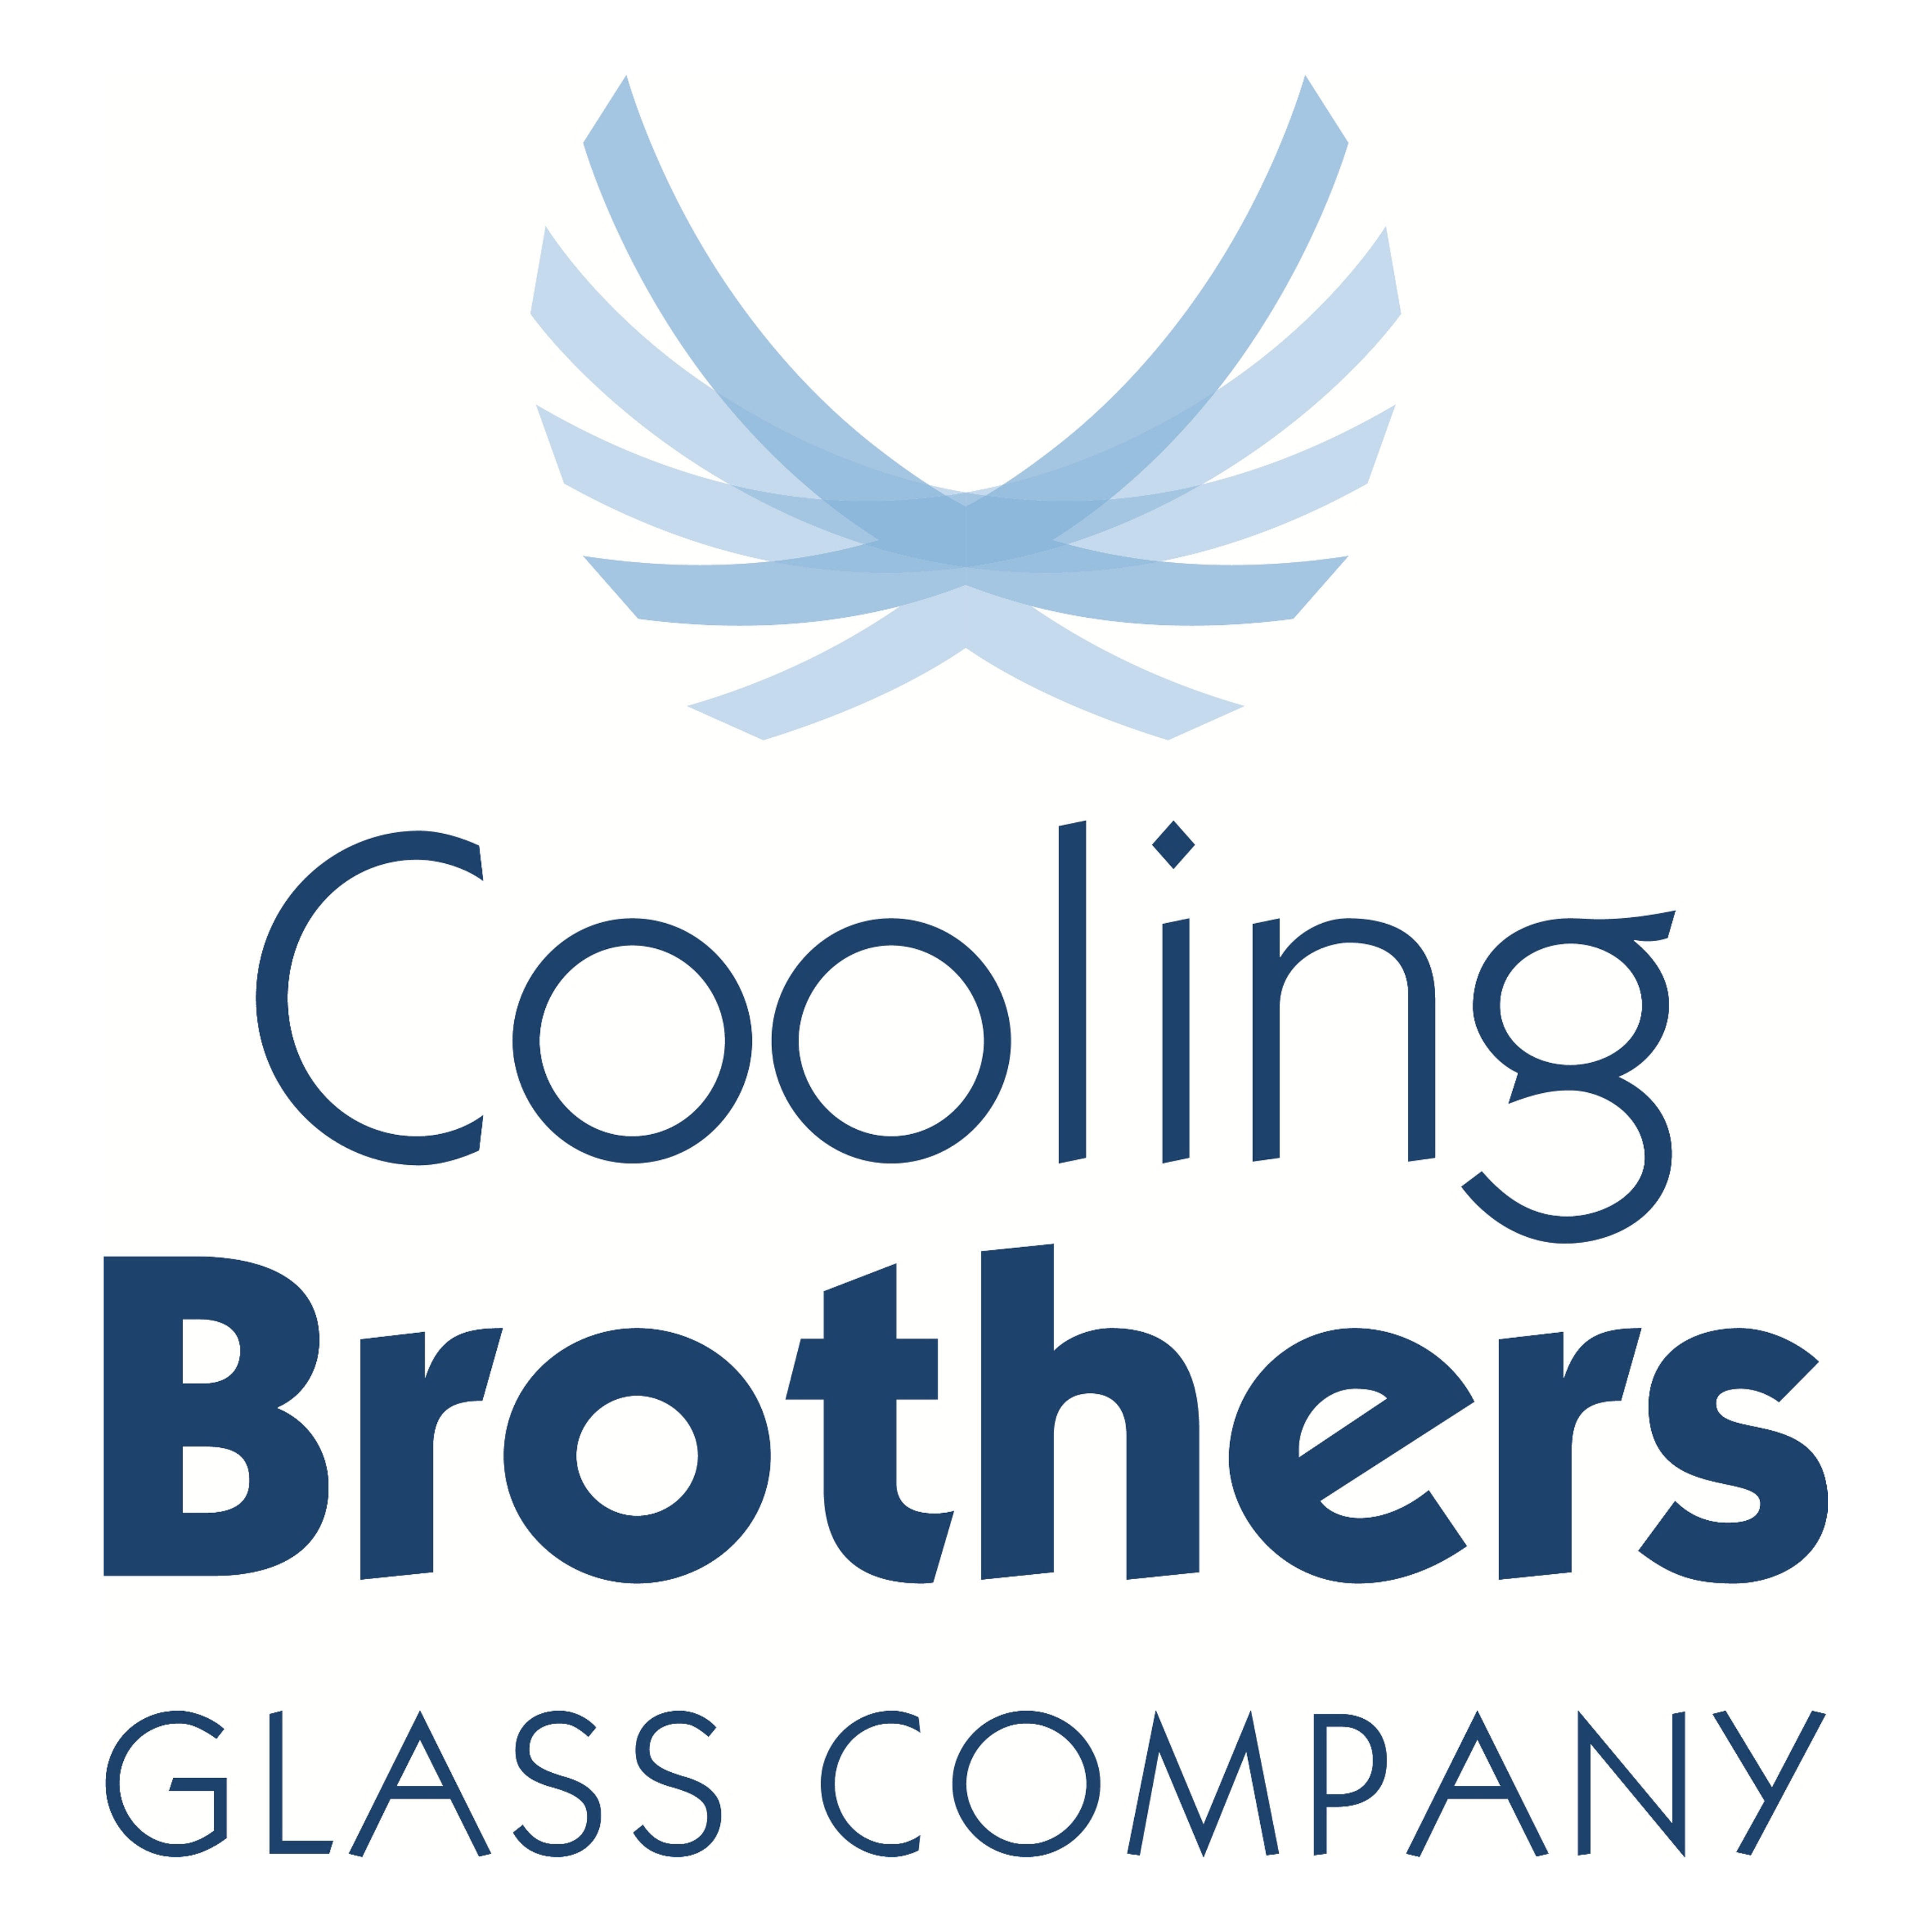 Cooling Brother's Glass Company and Digi Glass Australasia - Scoresby, VIC 3179 - (03) 8761 9130 | ShowMeLocal.com